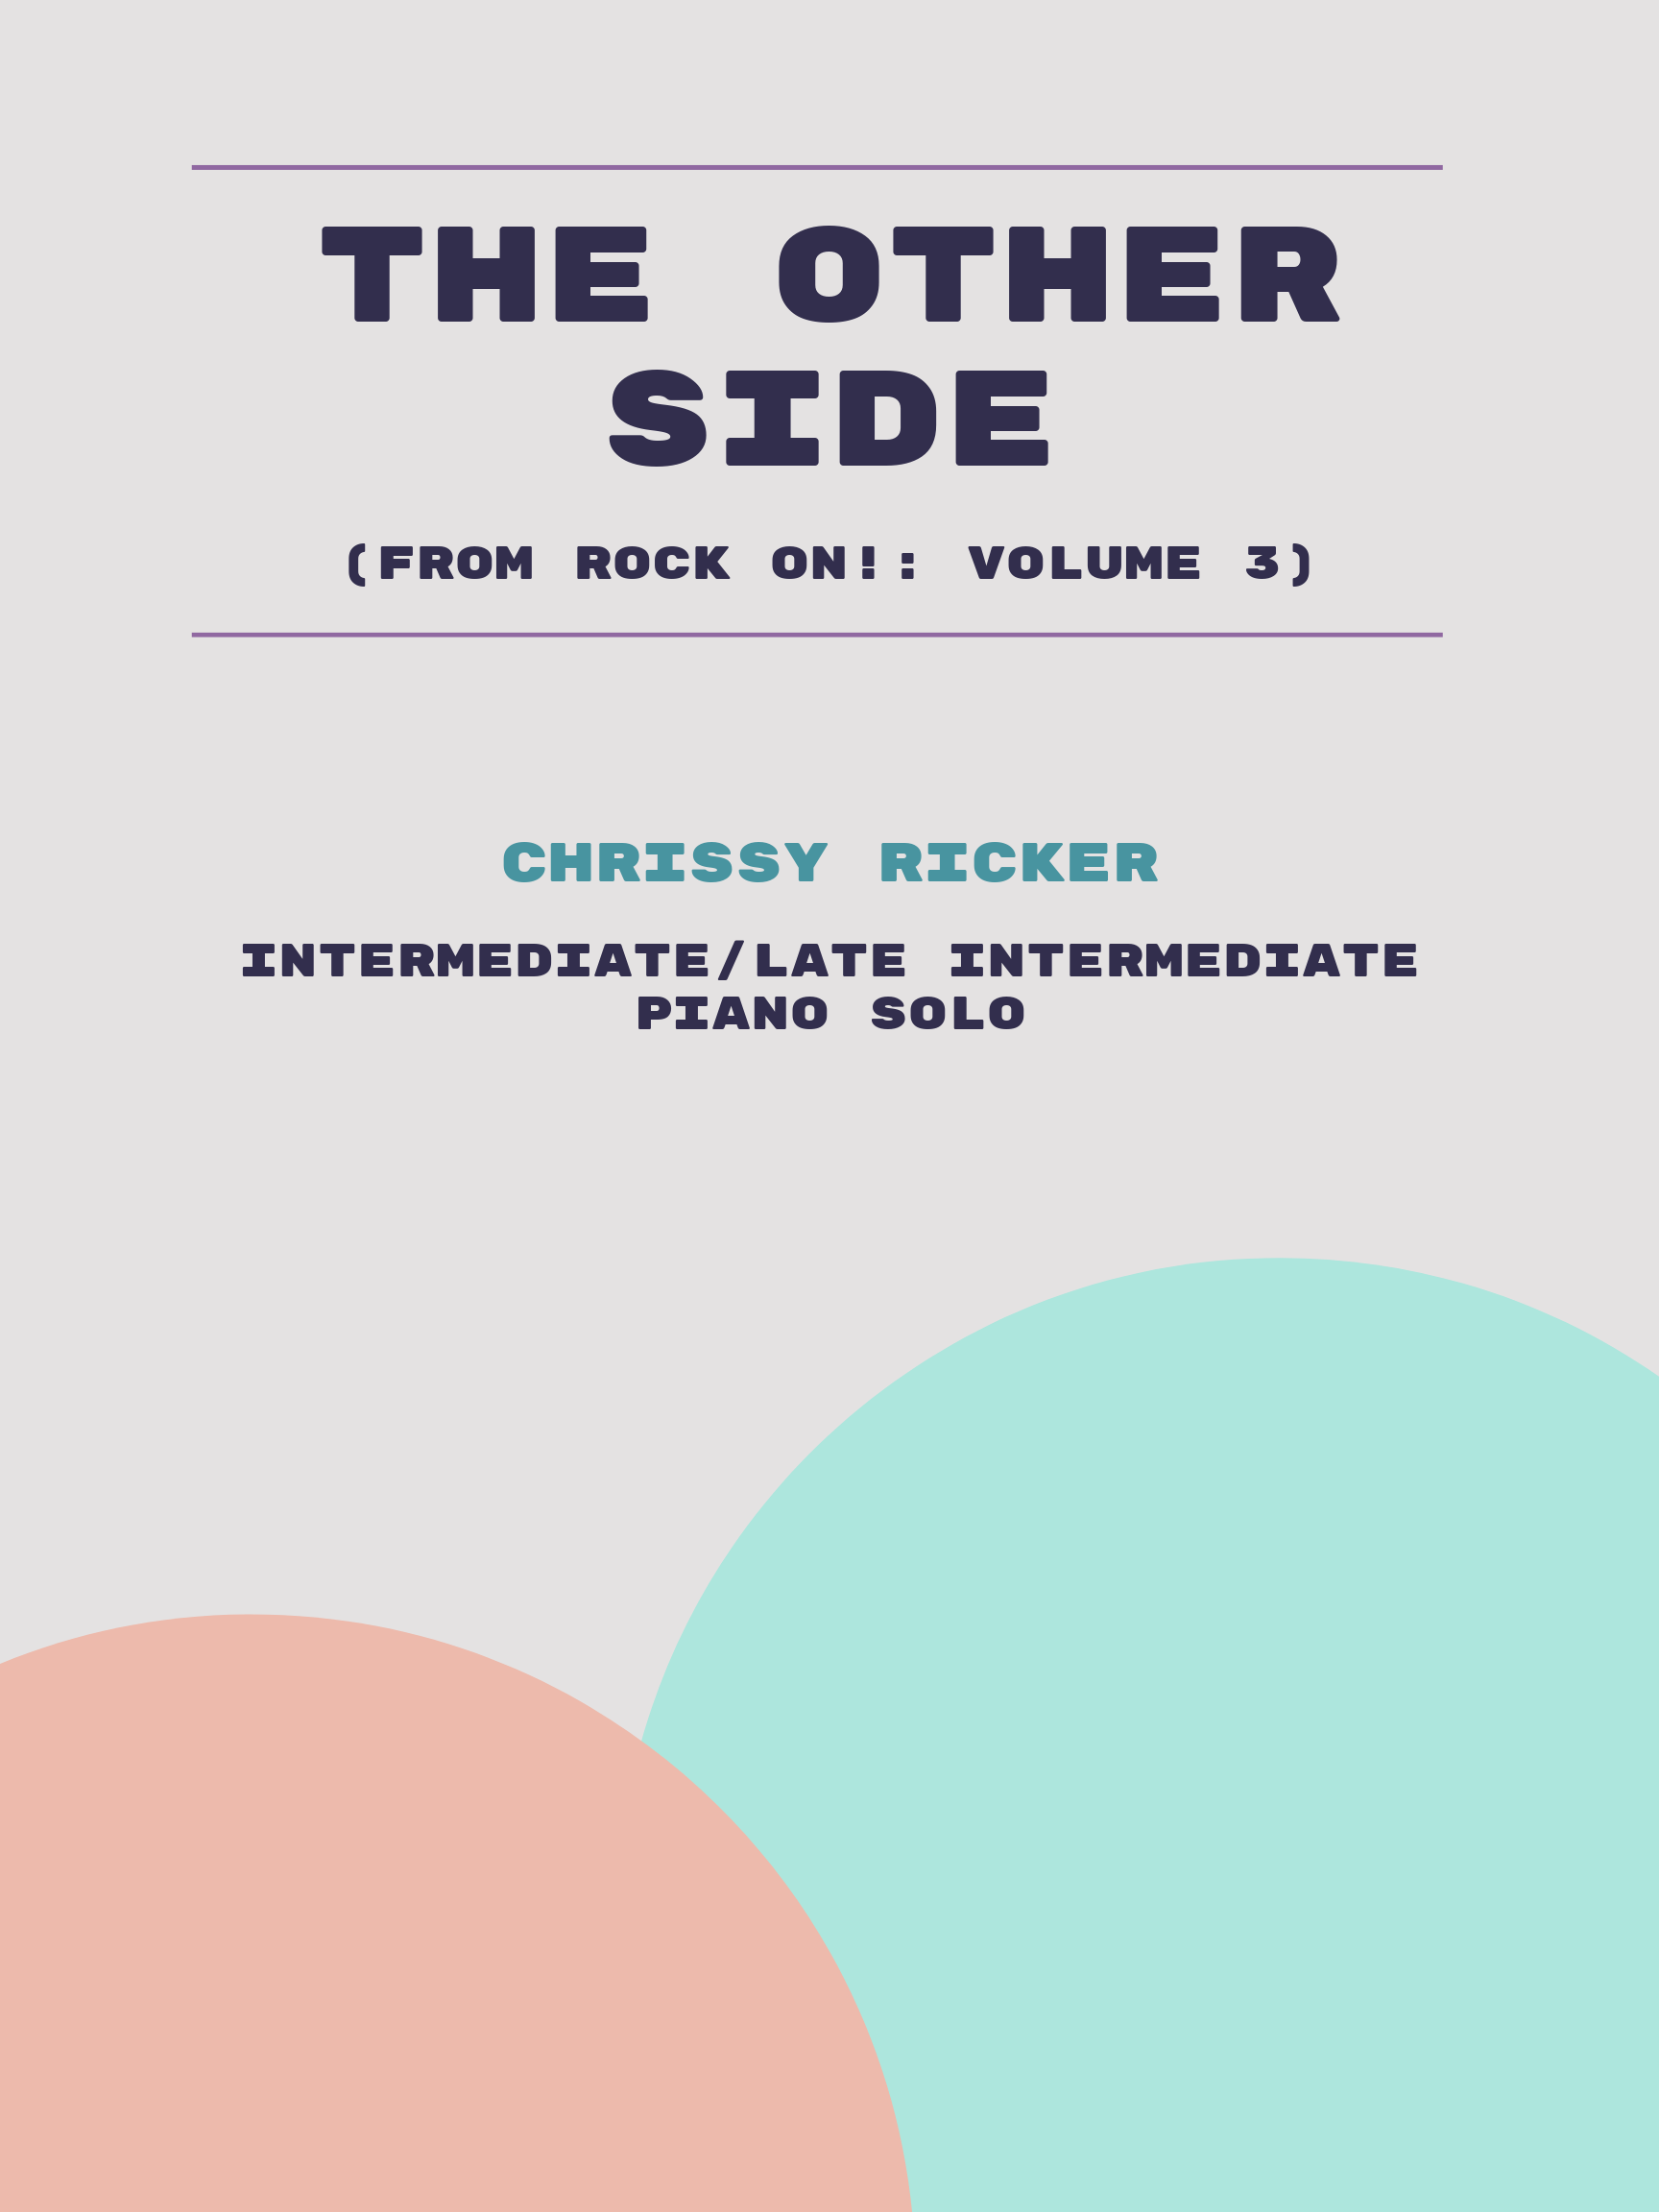 The Other Side by Chrissy Ricker